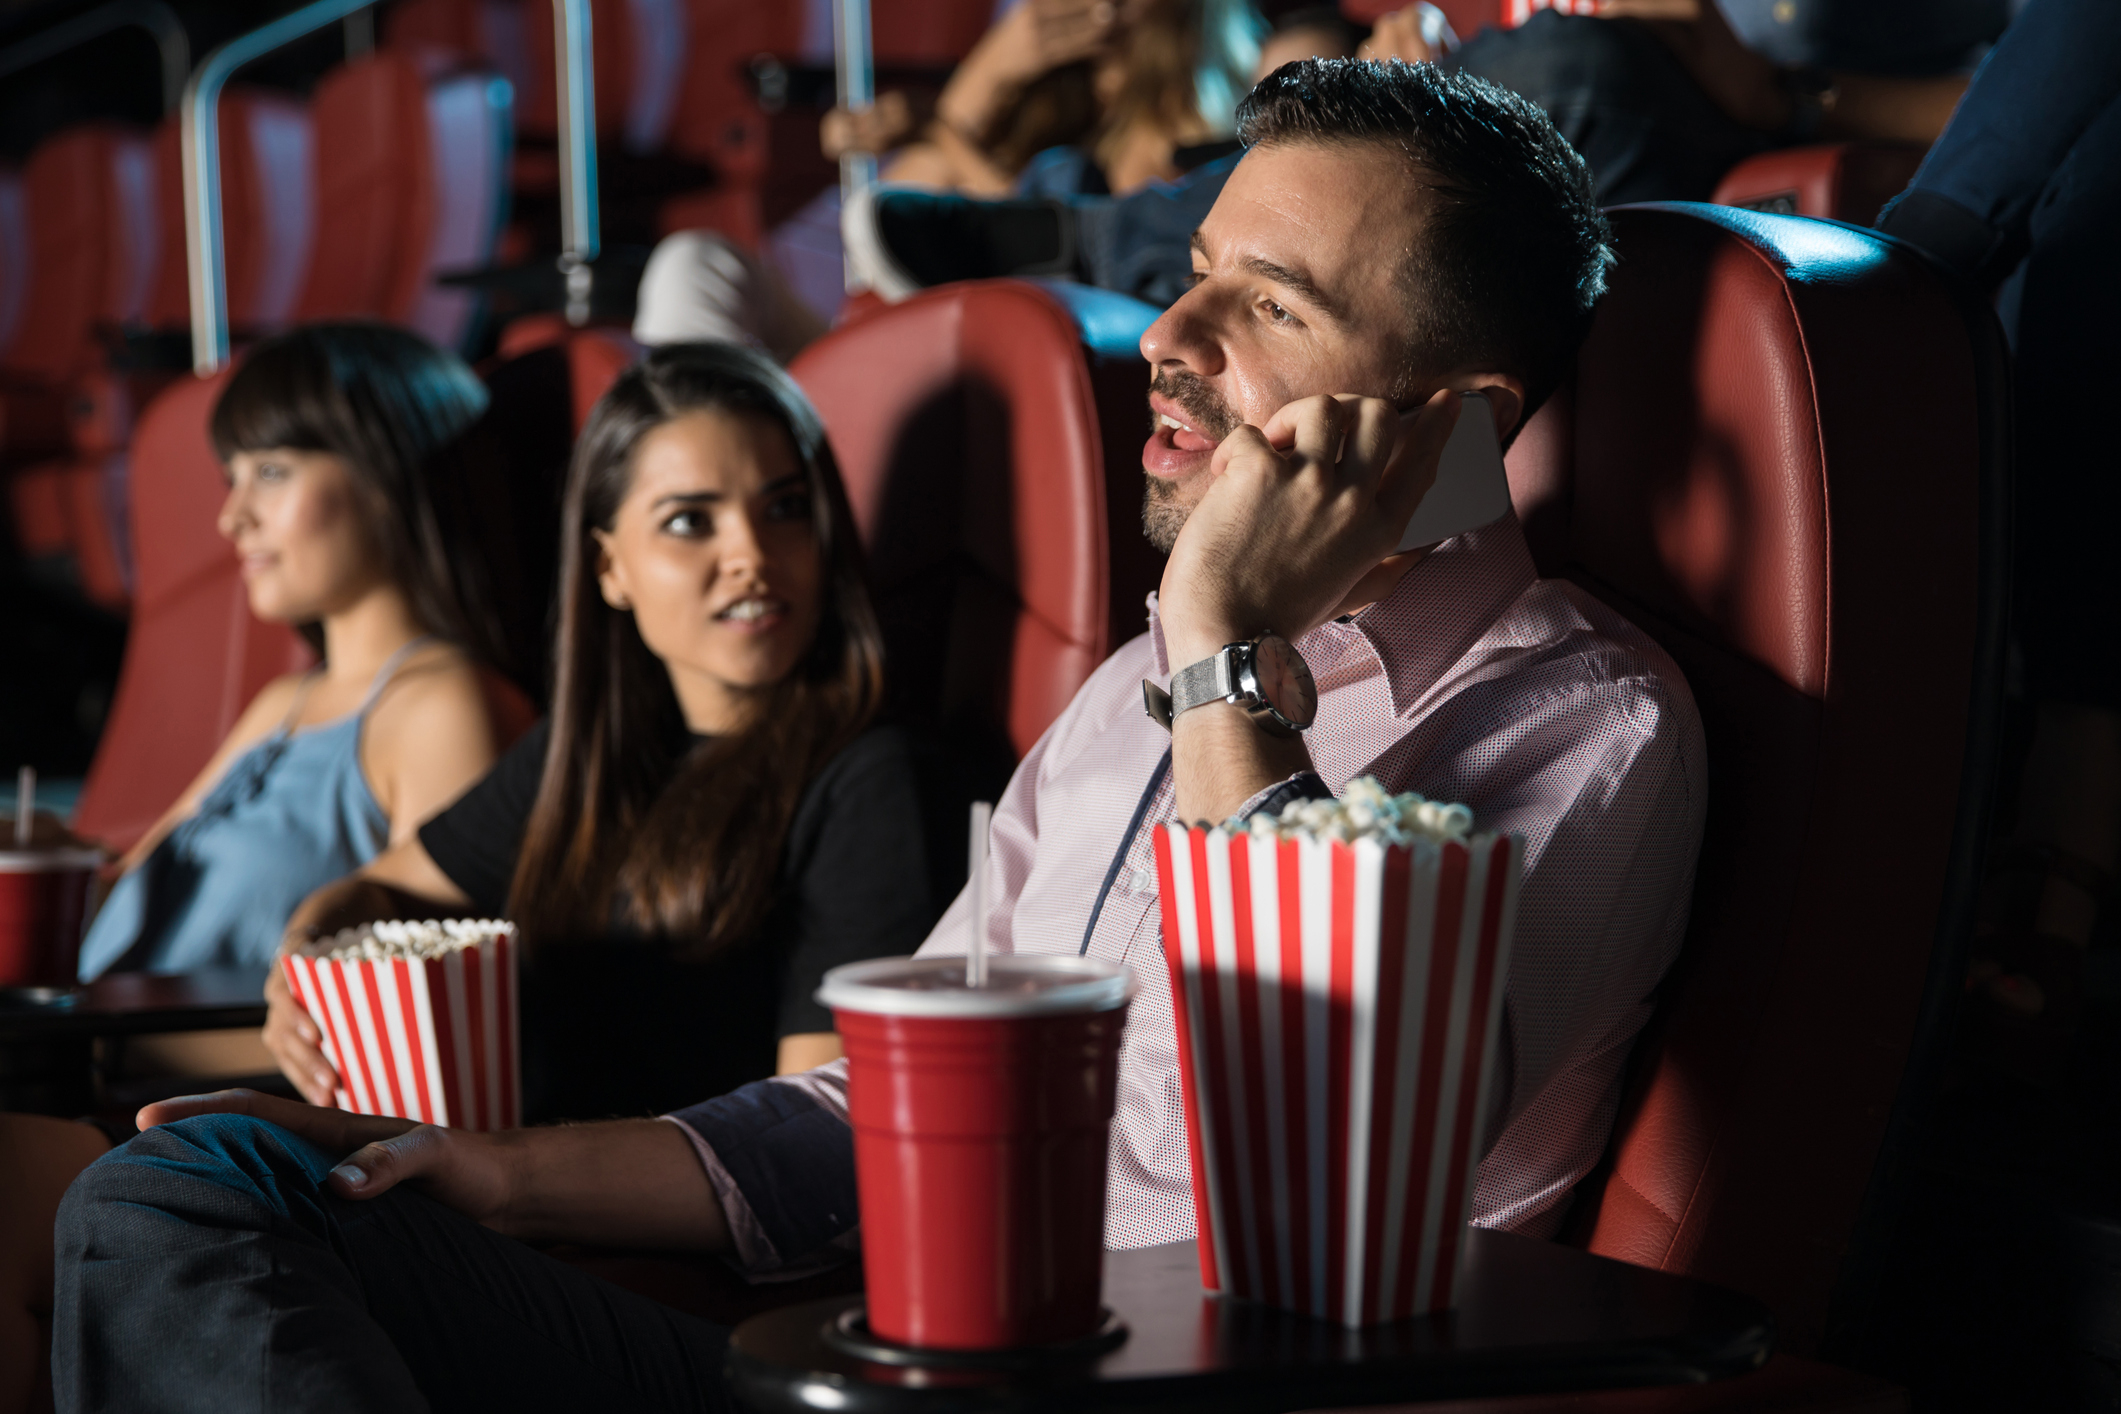 Man talking on phone in a cinema, disturbing others; woman next to him looks annoyed